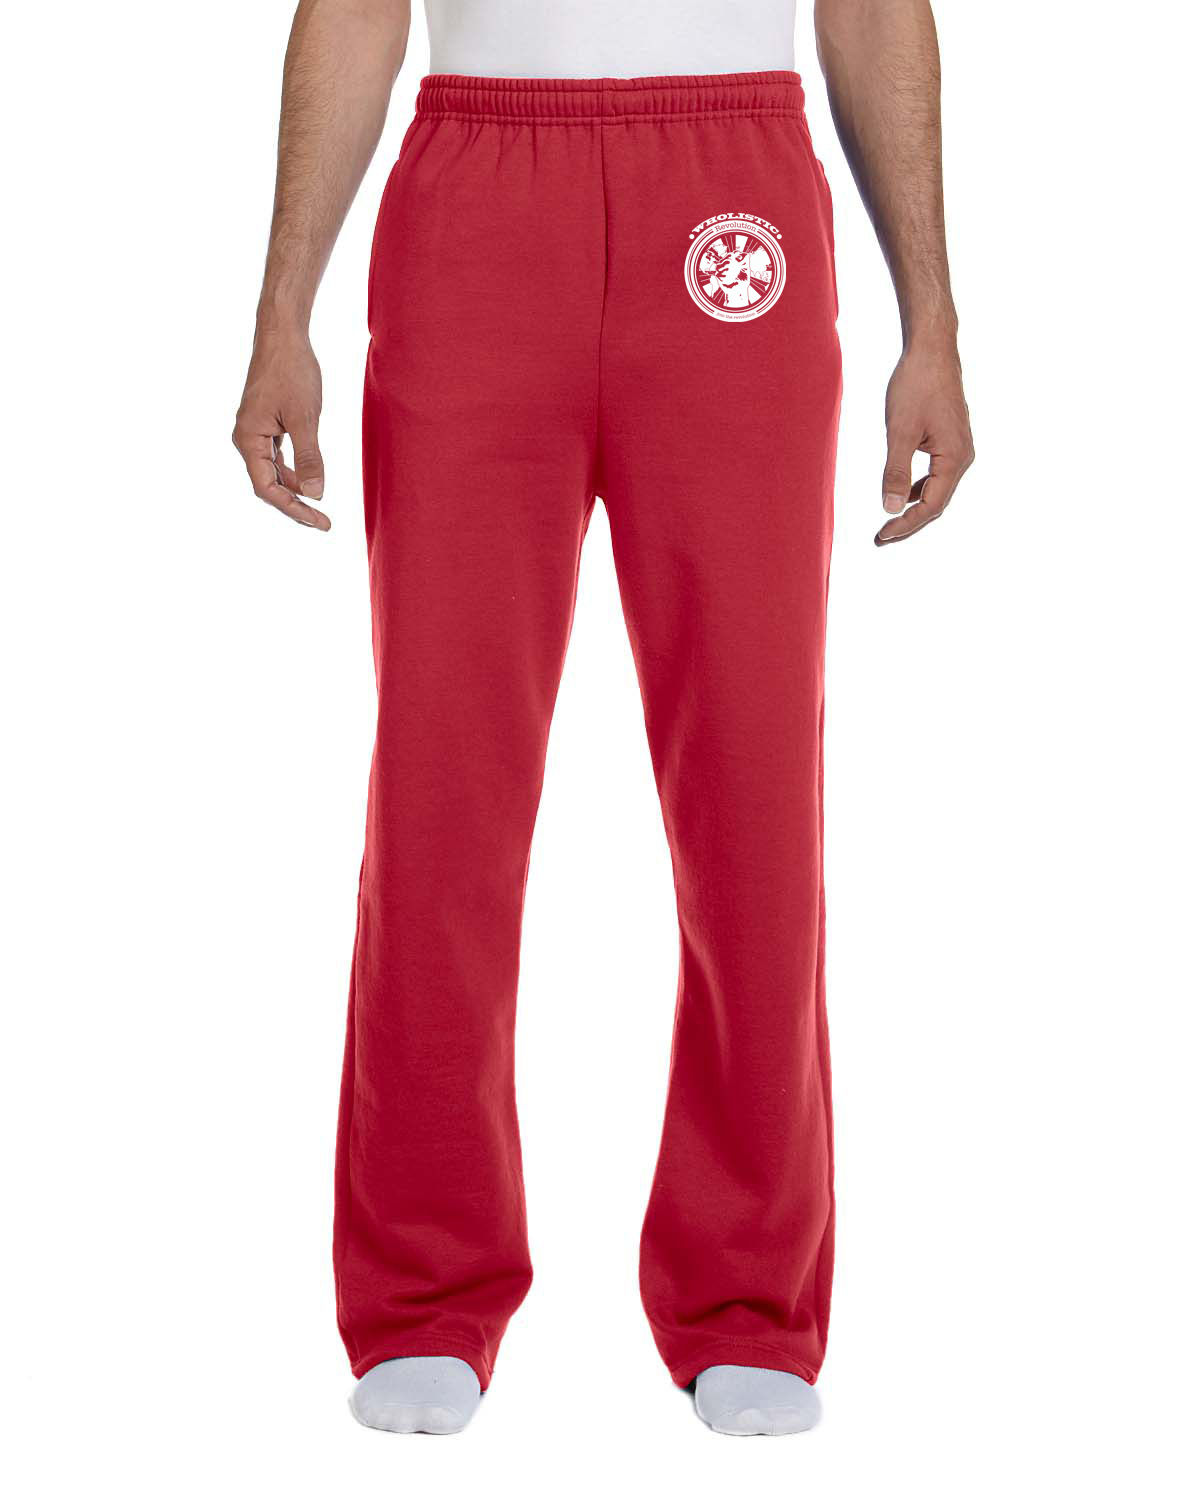 Open Bottom Sweatpants with Pocket (WR)